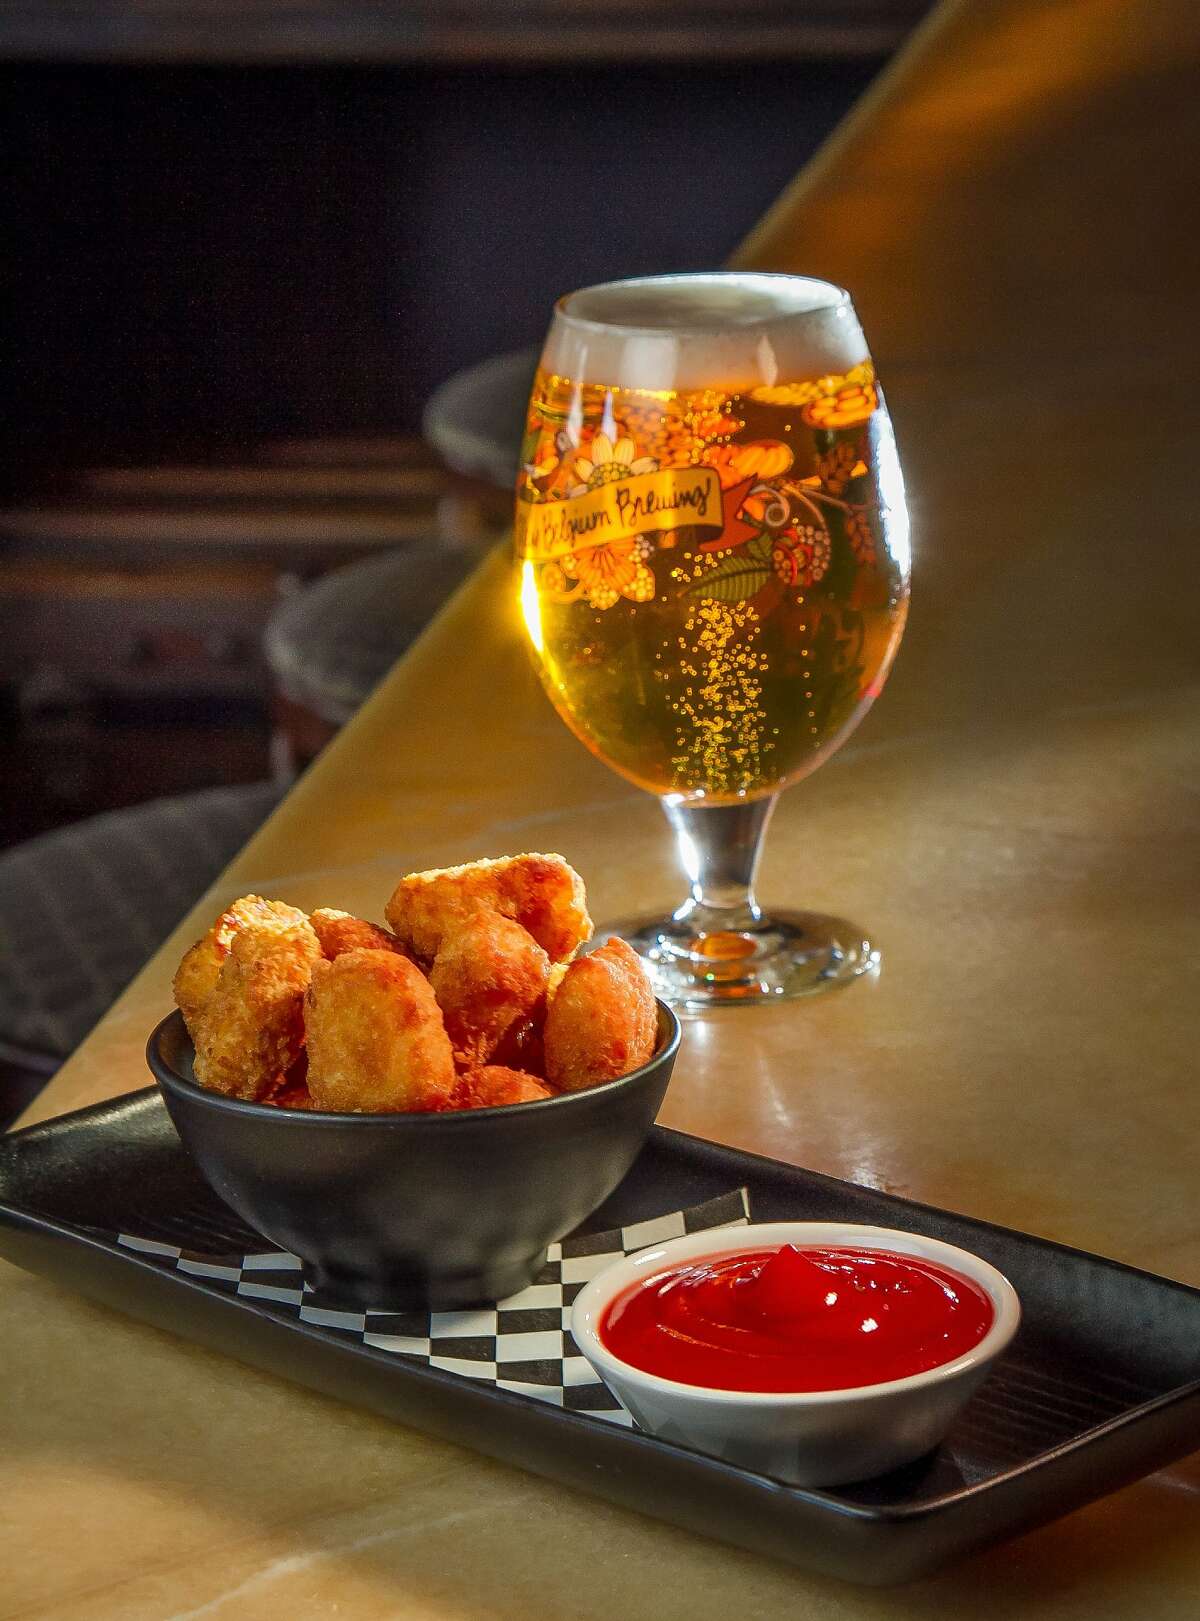 The Gourmet Tots with a Pilsner Urquell at Noir Lounge, Calif., is seen on Wednesday, March 19th, 2014.